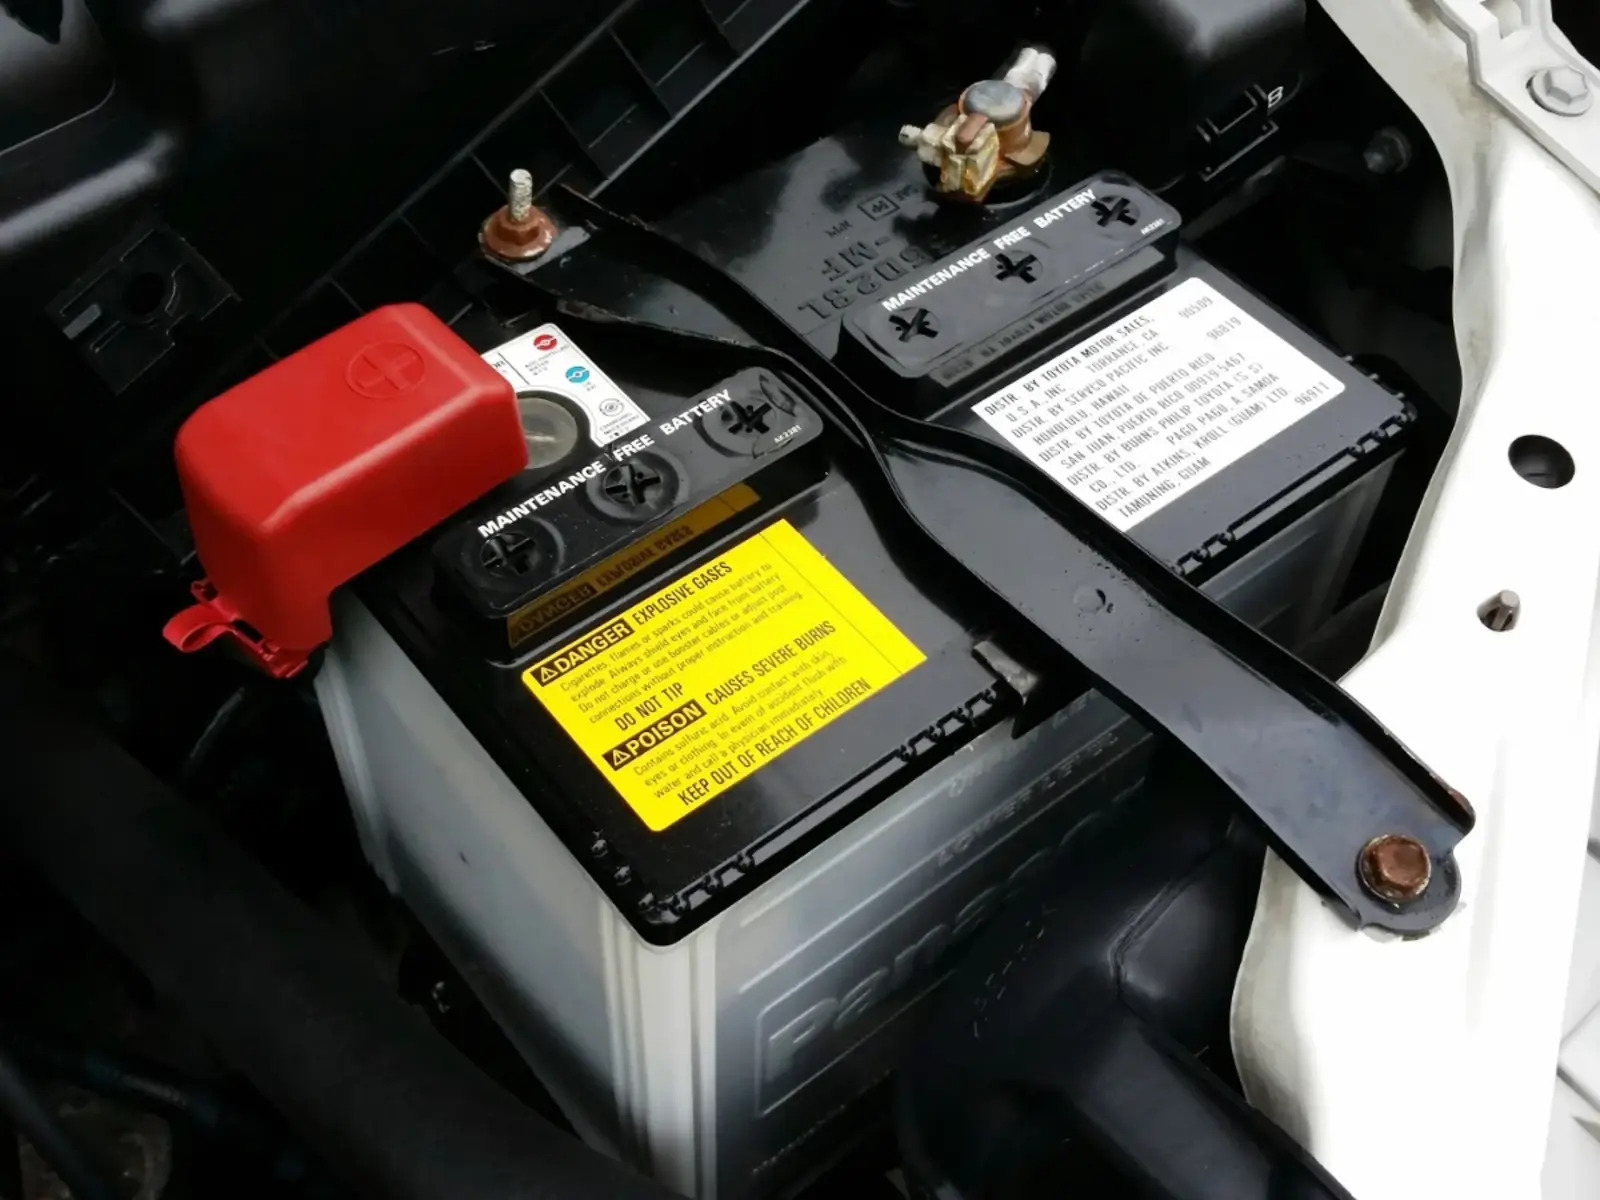 What Can Replace Battery Electrolyte?